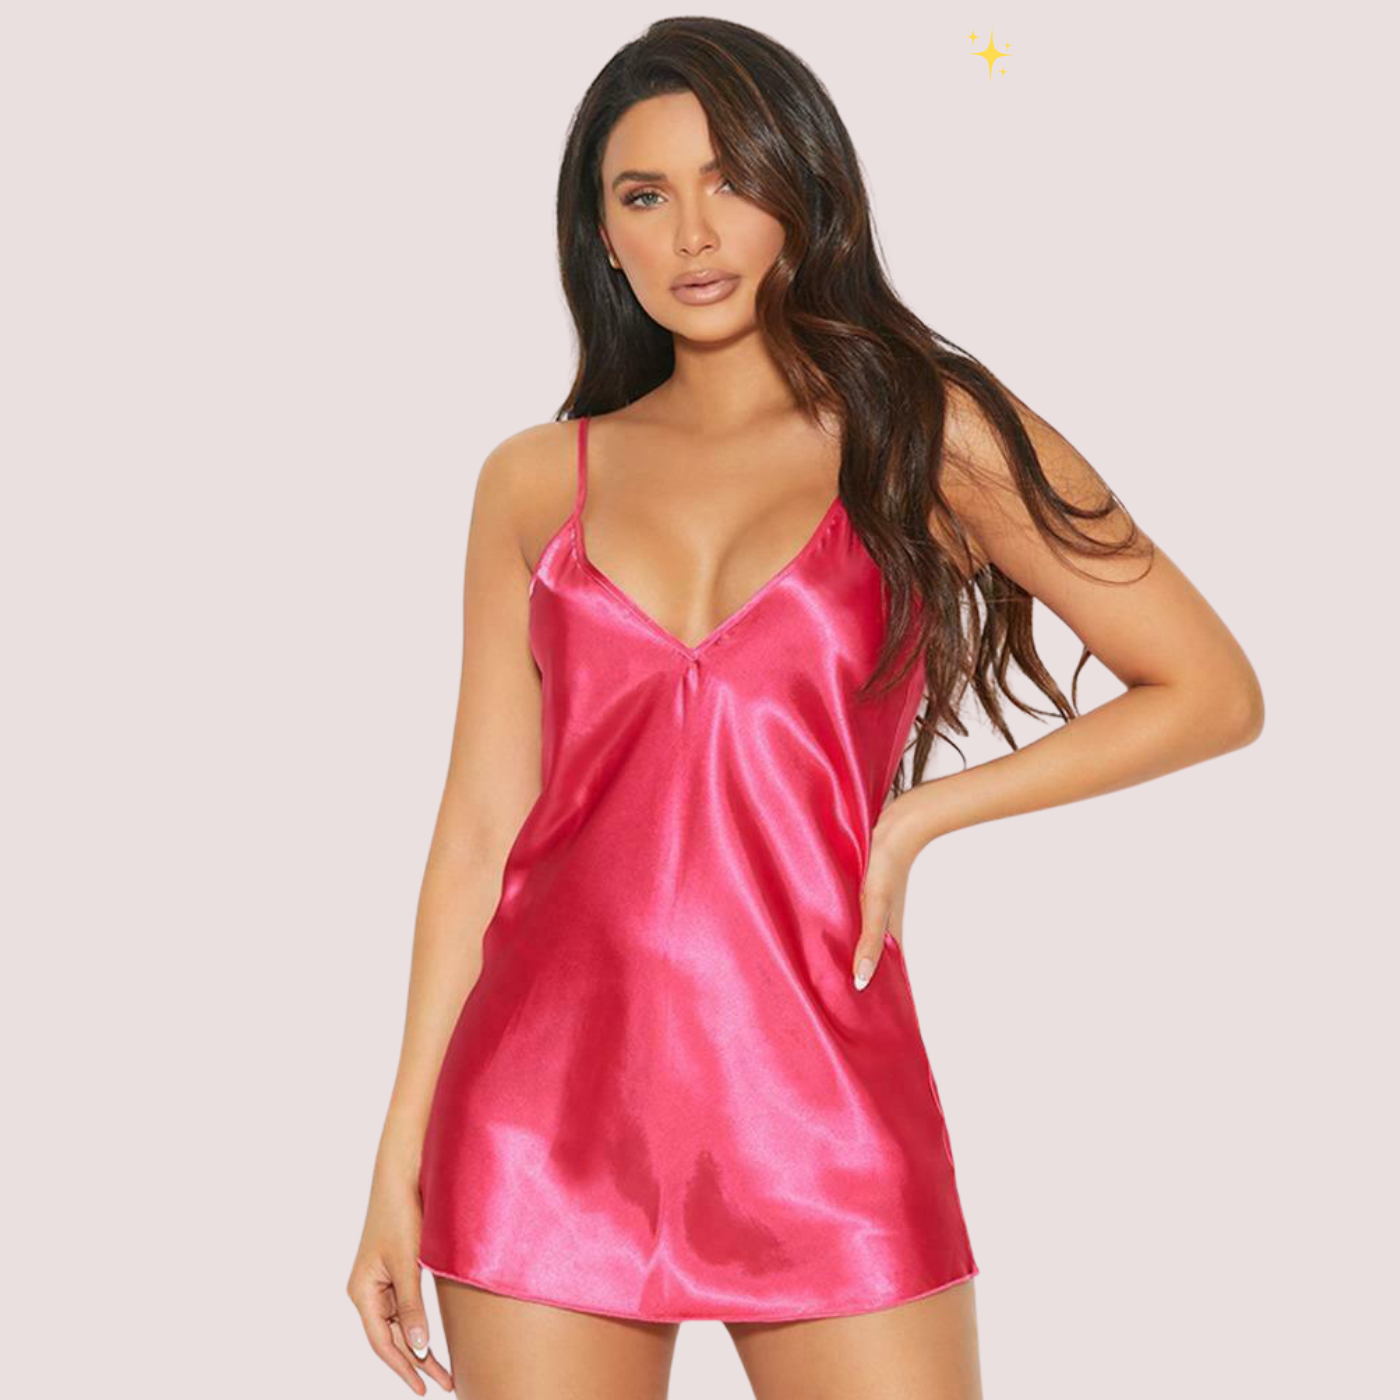 Lingerie Dropshipping Business in India- Best selling products